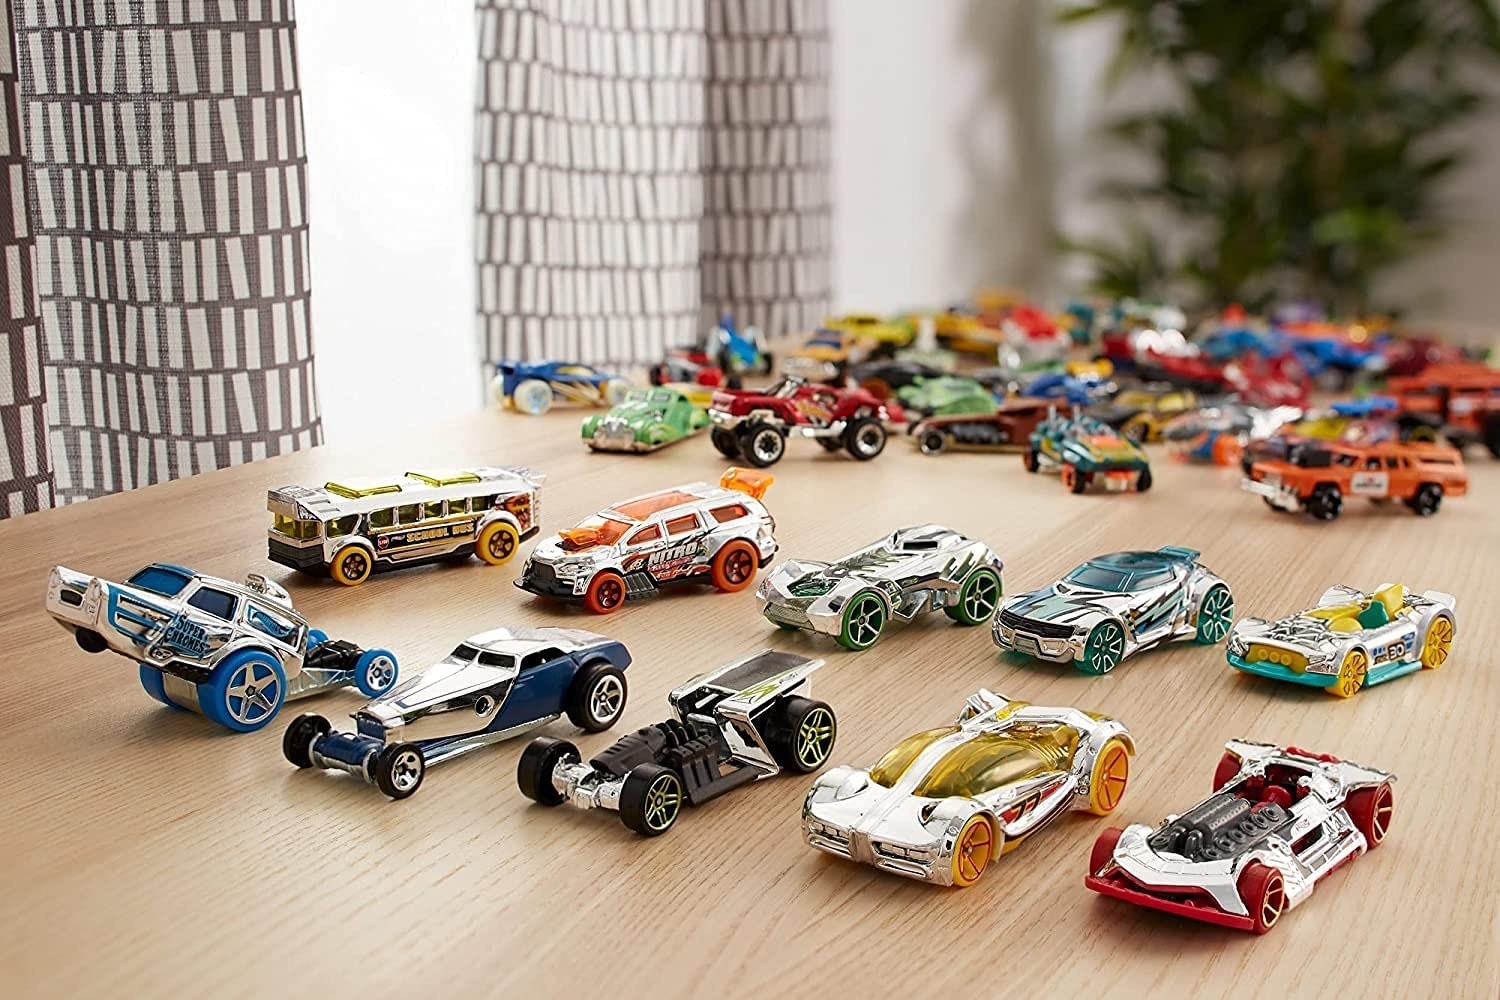 A collection of Hot Wheels cars on a table